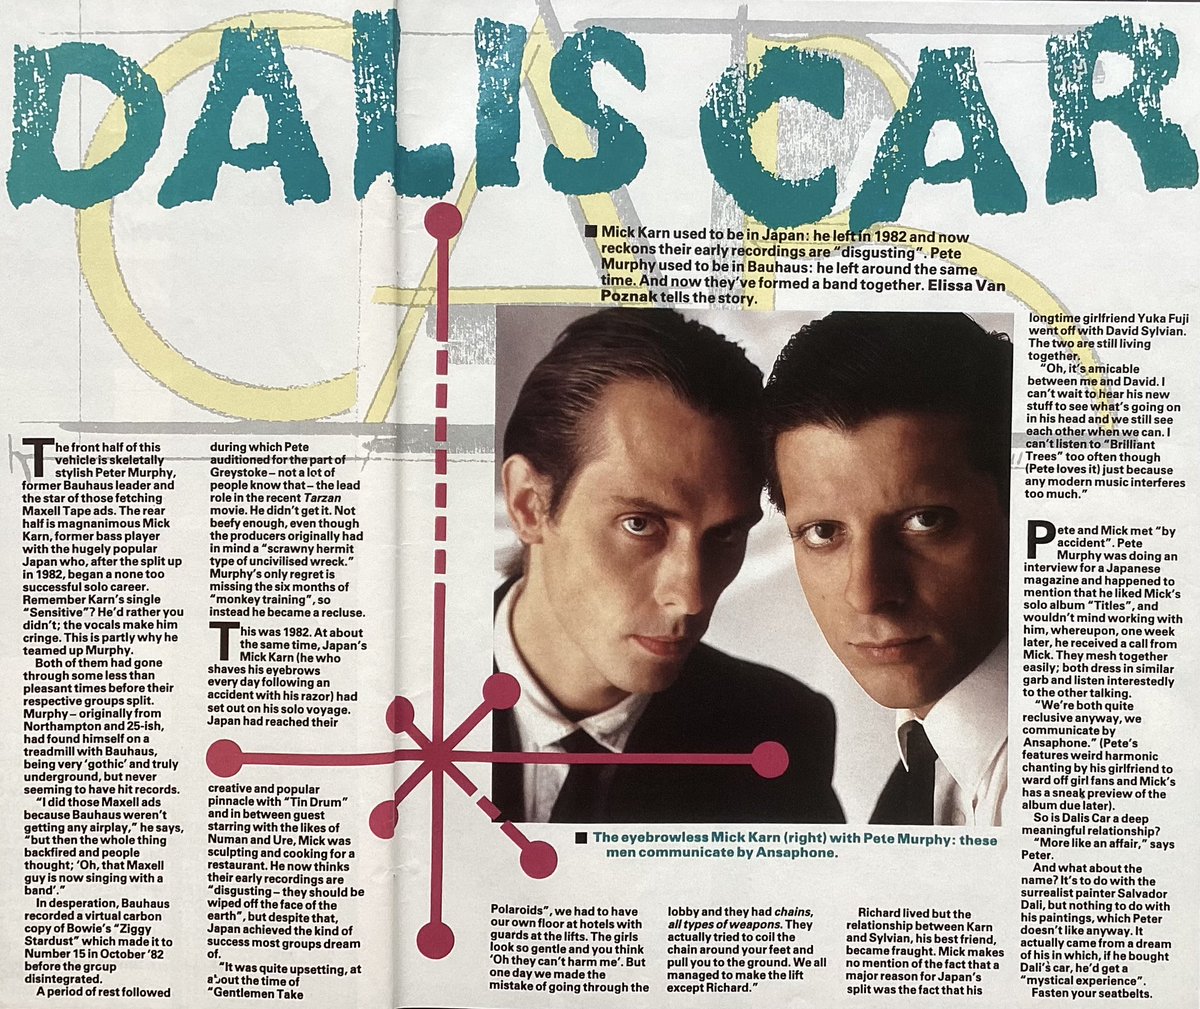 1984 - Peter Murphy and Mick Karn are interviewed by Smash Hits about their new project DALIS CAR